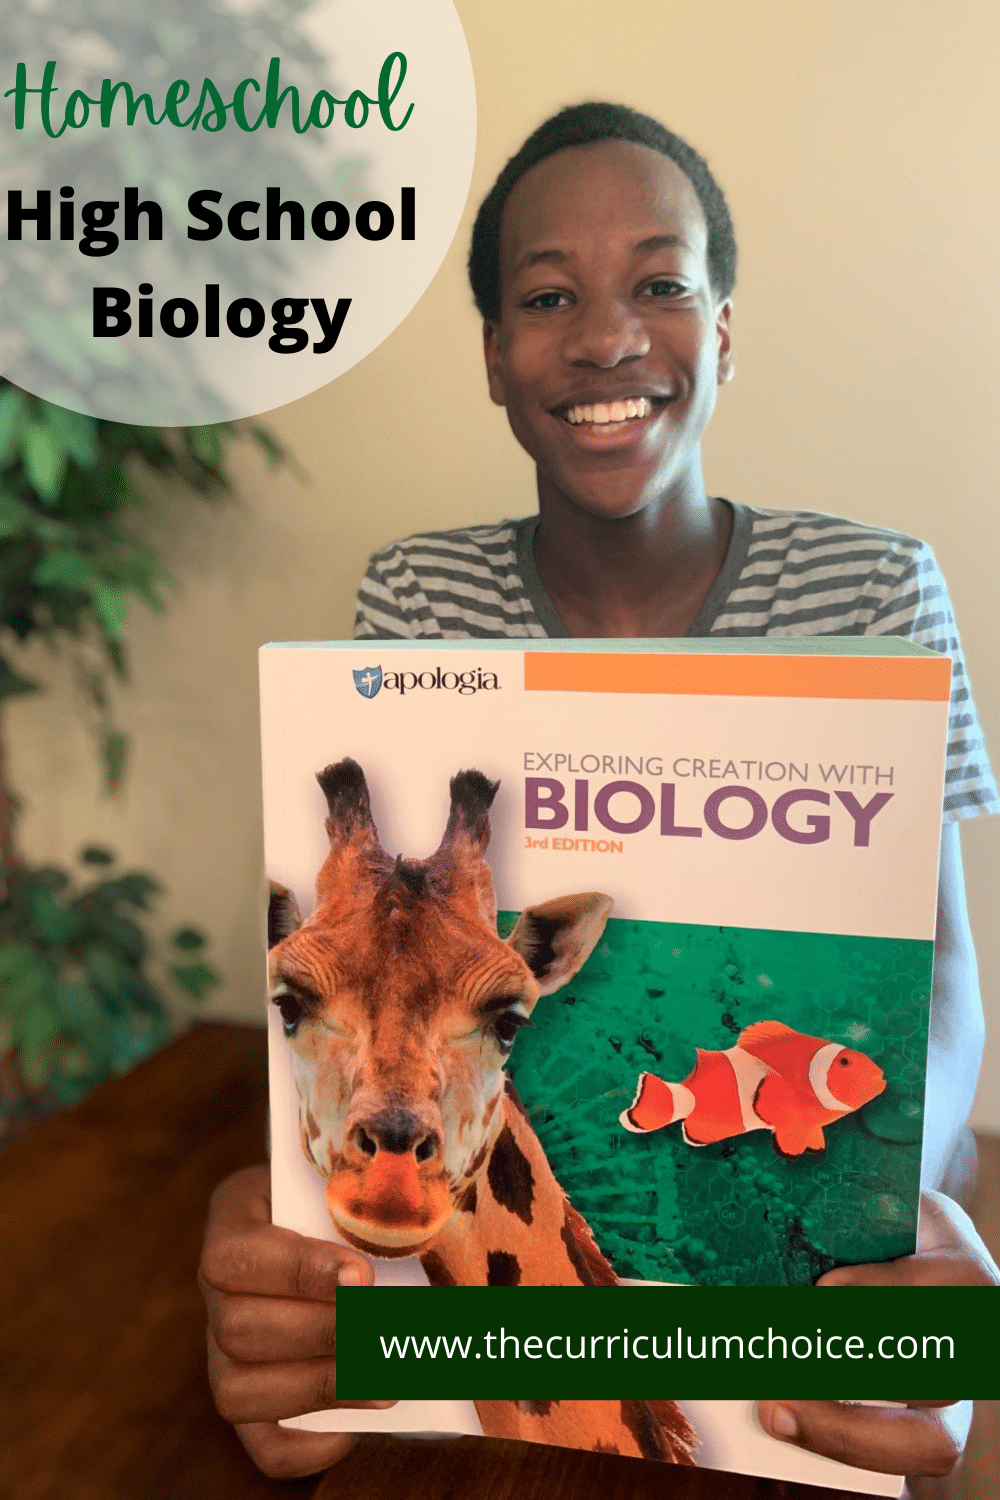 High School Biology for Your Homeschool with Apologia Science